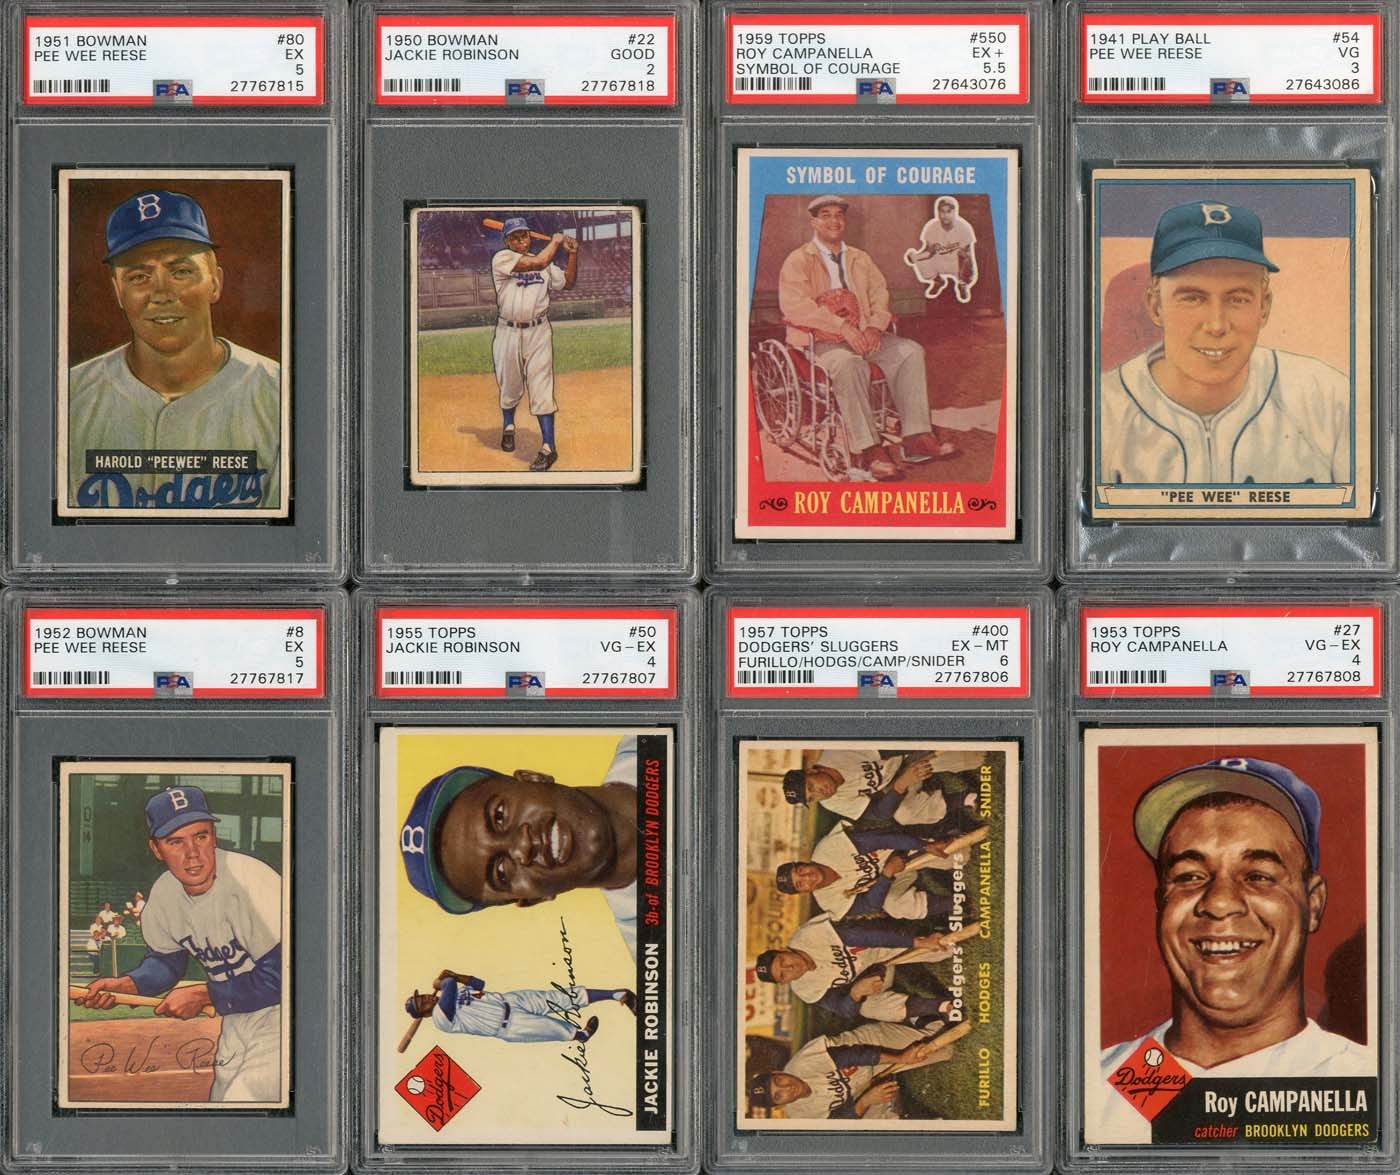 1940s-1960s Brooklyn/Los Angeles Dodgers Collection with Robinson, Koufax, Campy & Reese - LOADED!